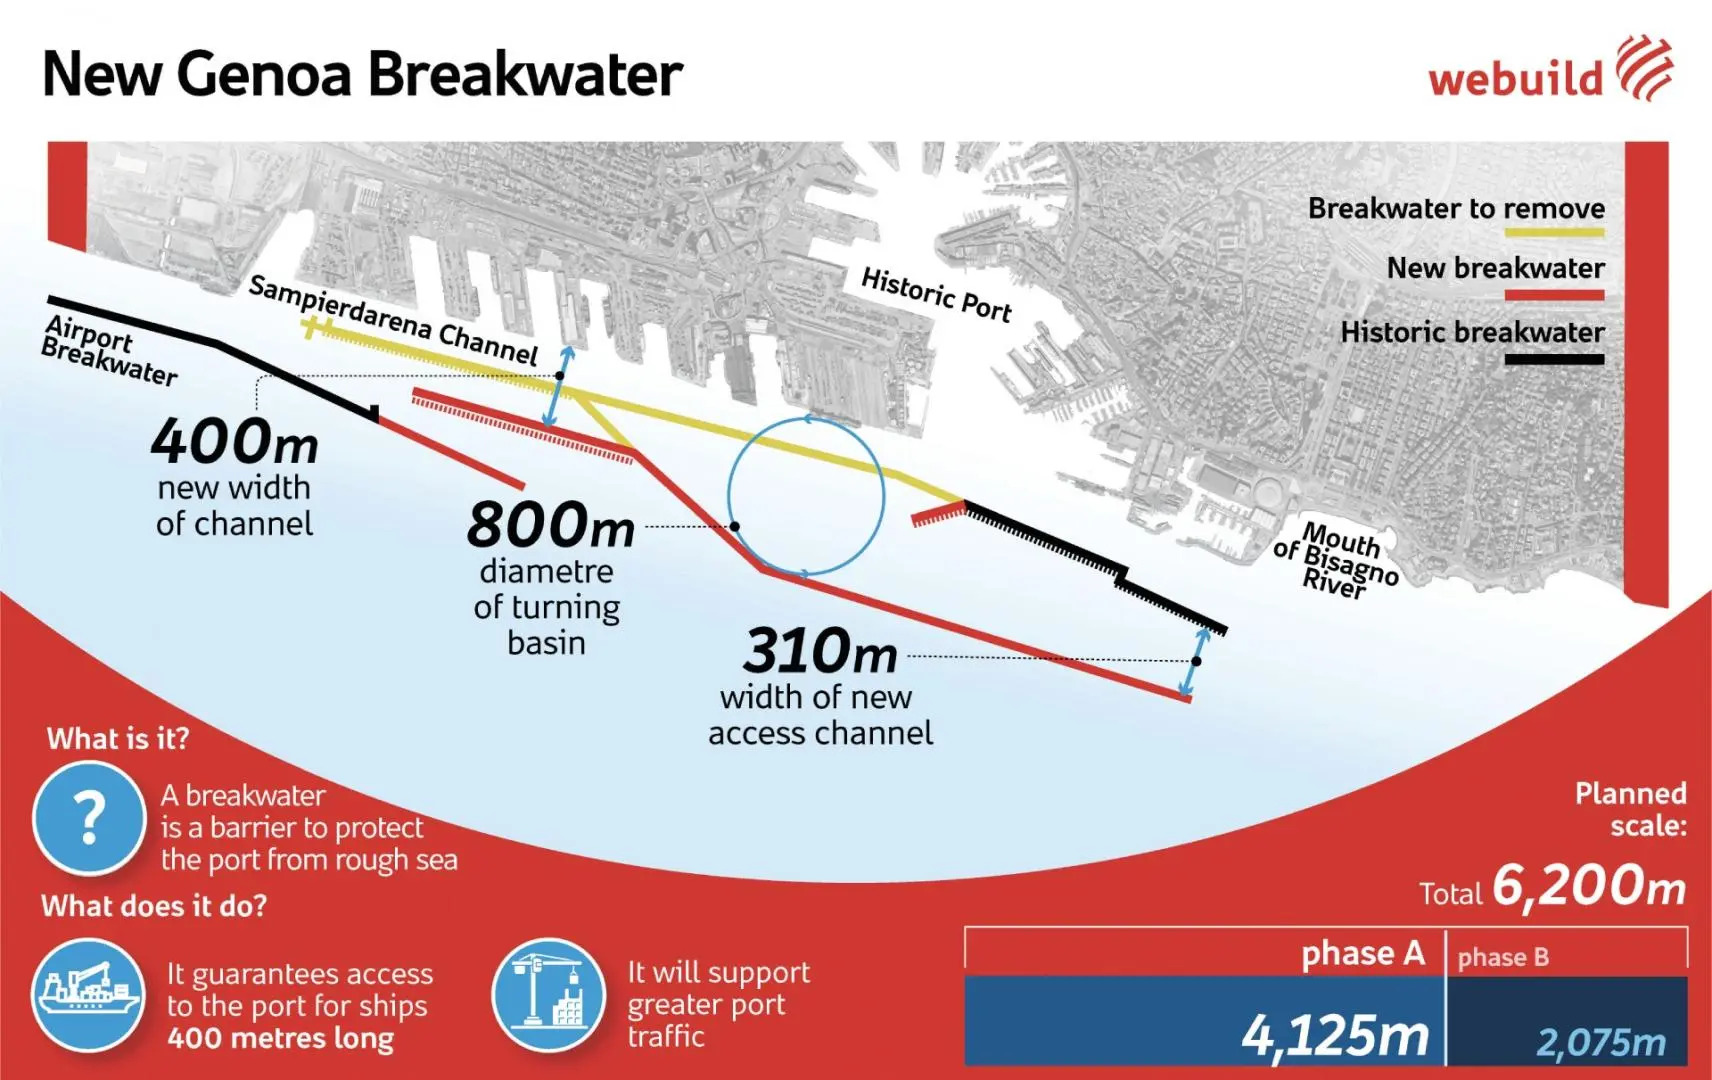 The port of Genoa will have the deepest breakwater dam in Europe